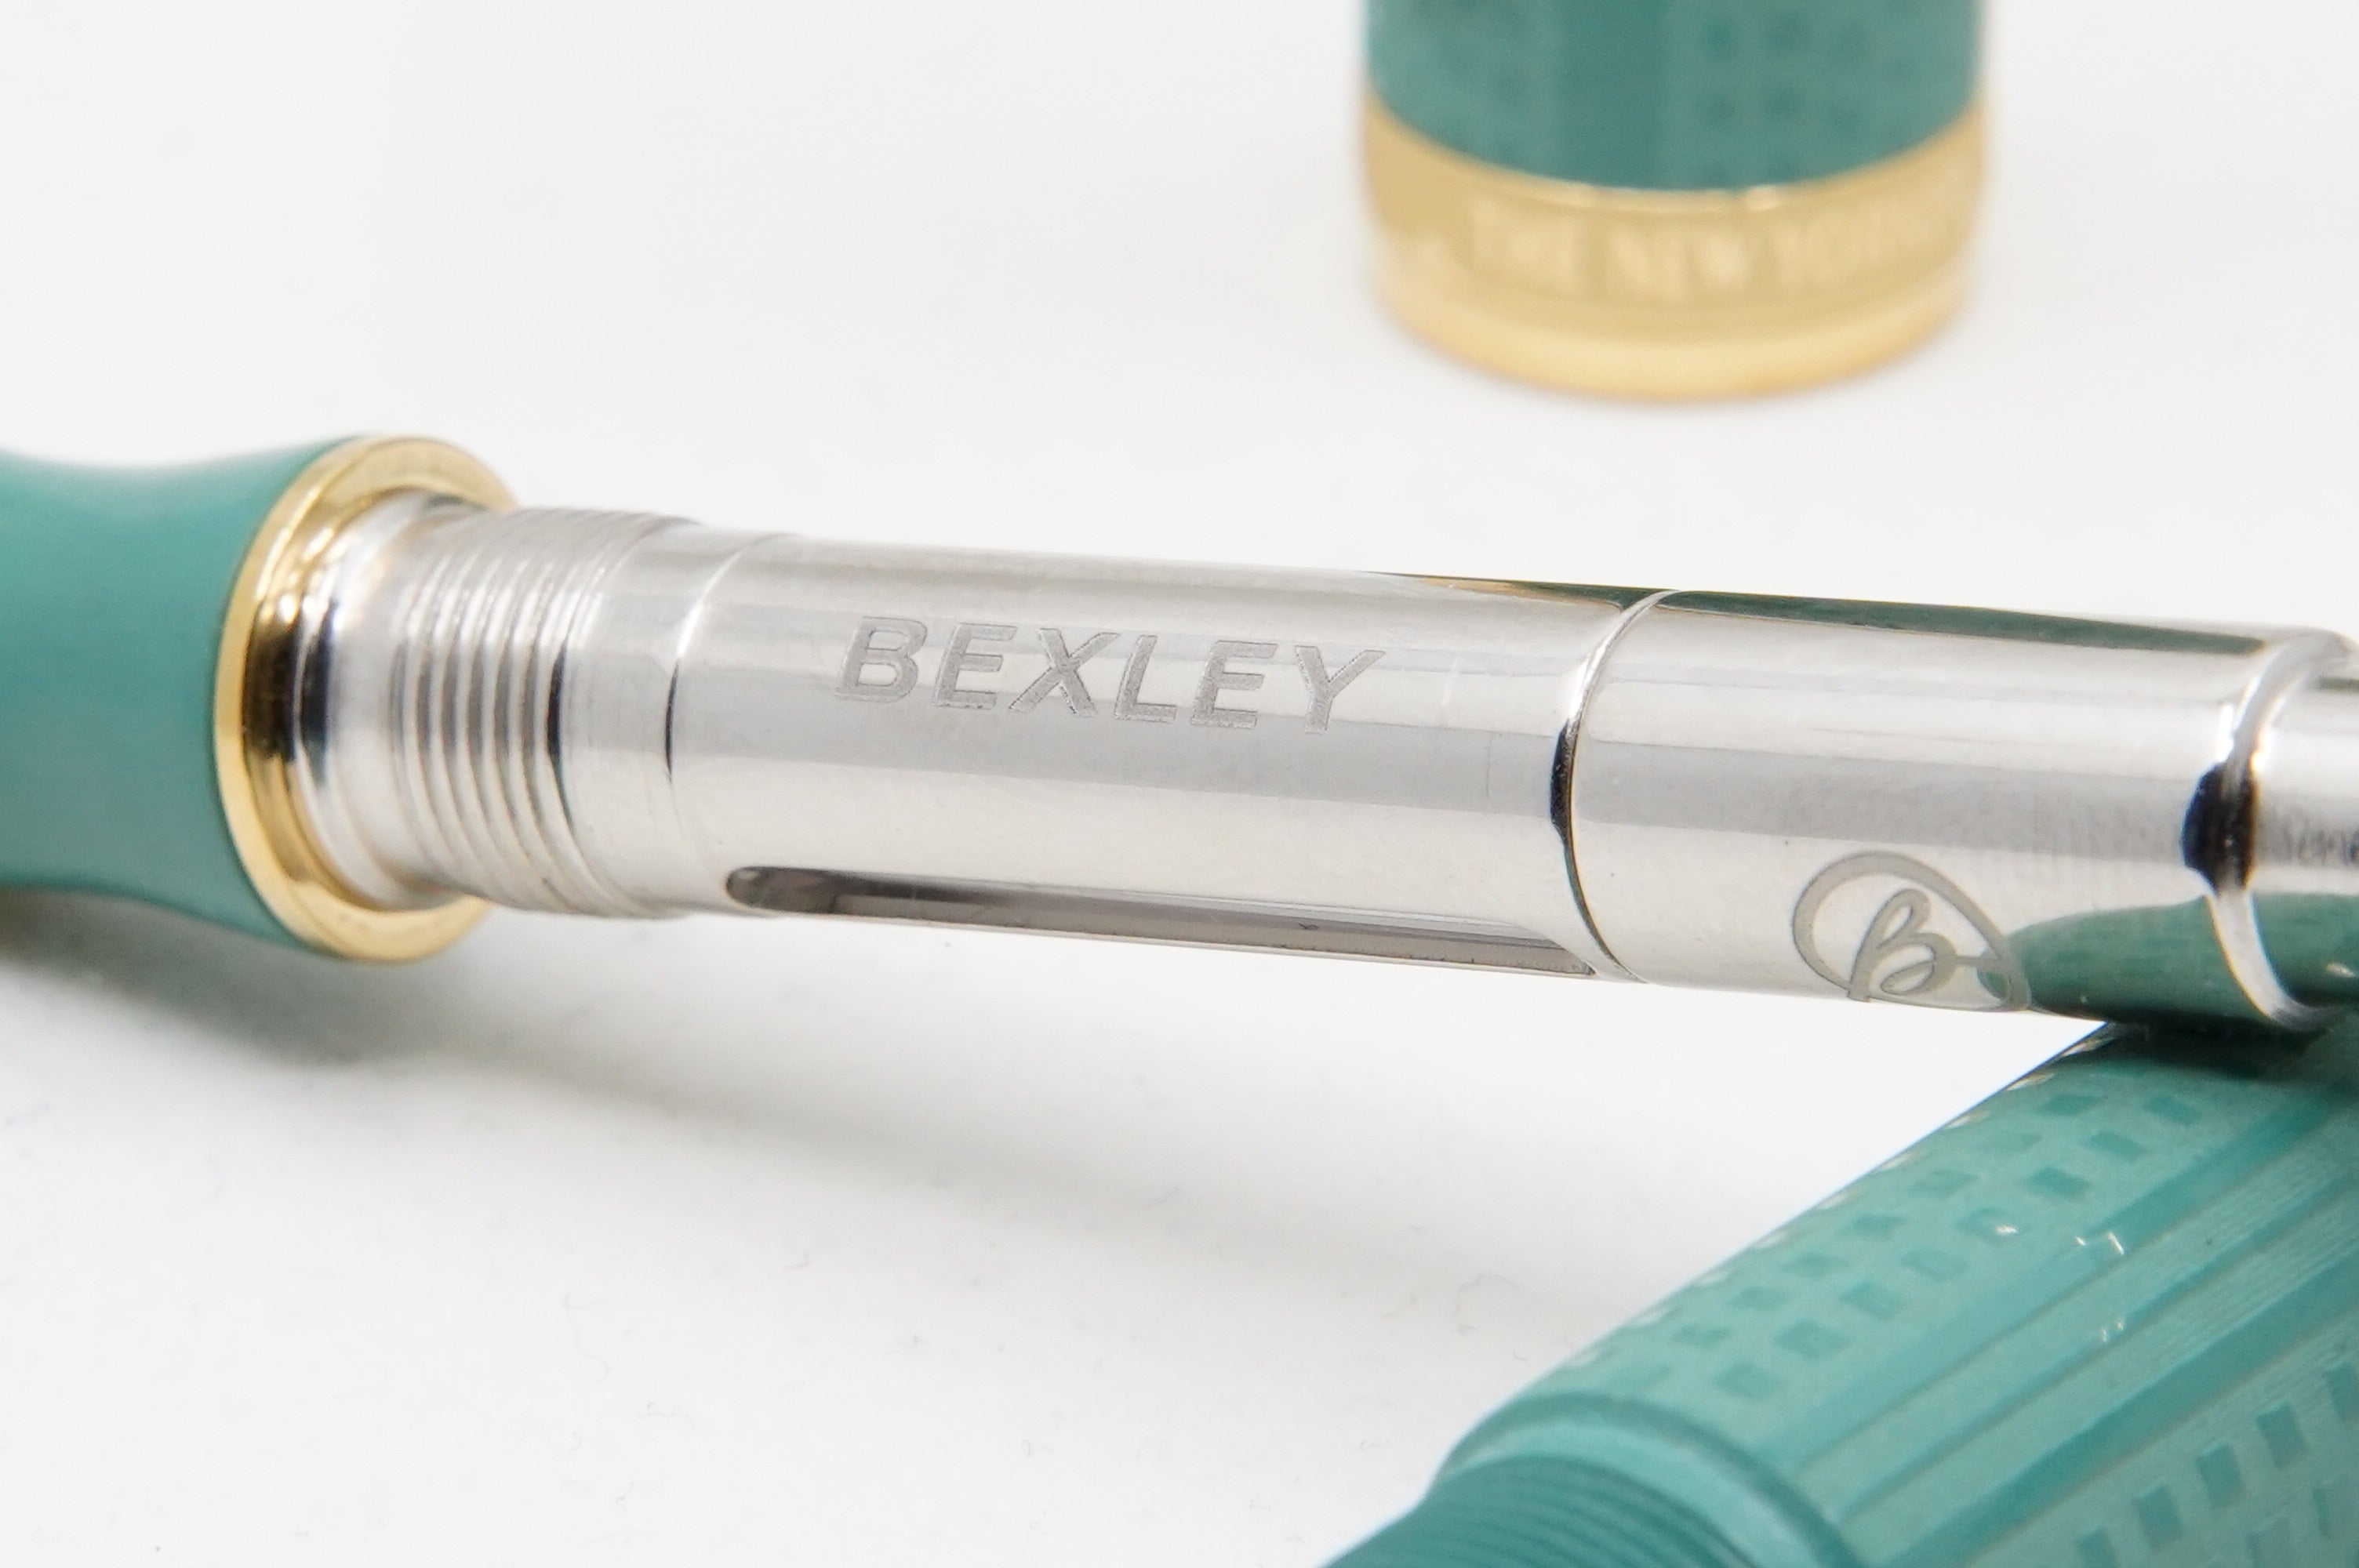 Bexley New Yorker Empire State Building Chased - Green Ebonite